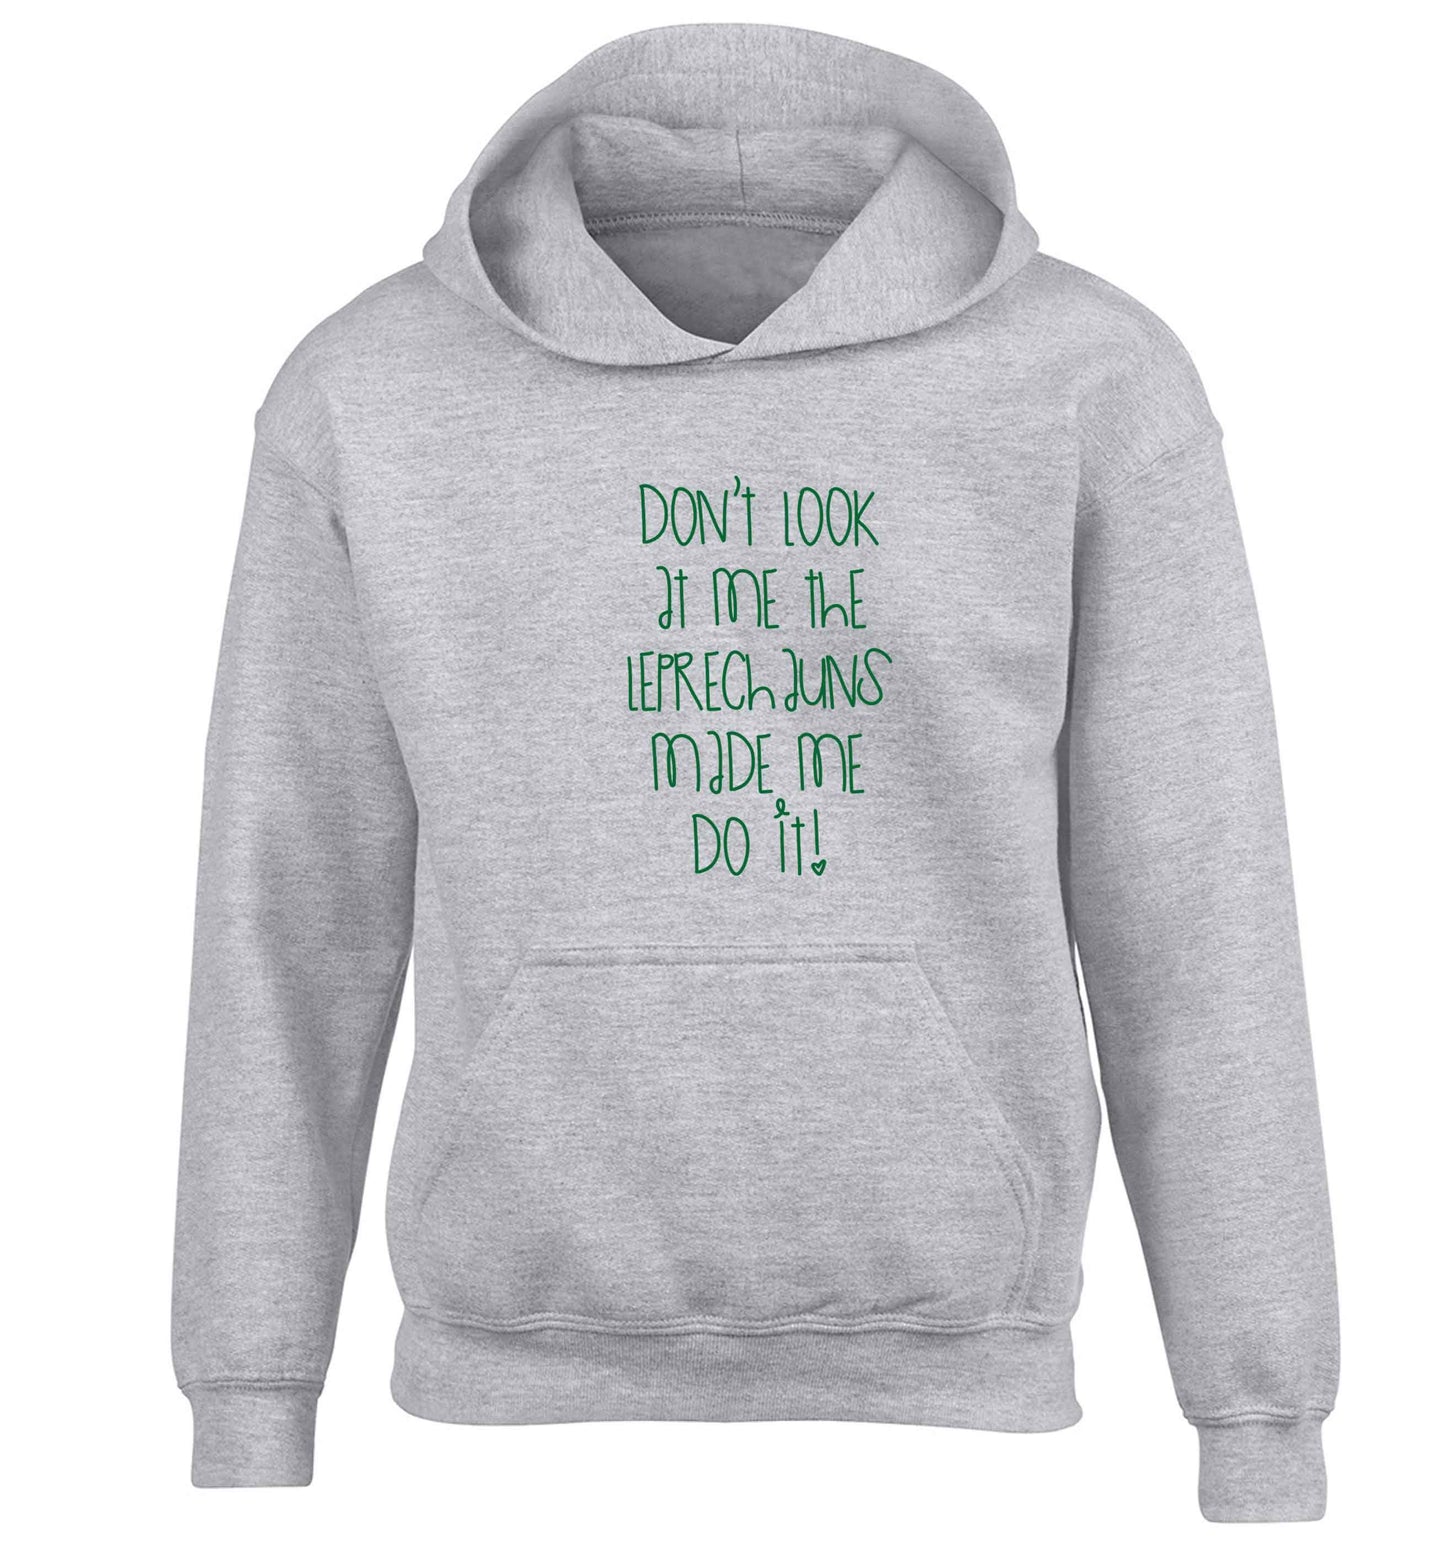 Don't look at me the leprechauns made me do it children's grey hoodie 12-13 Years